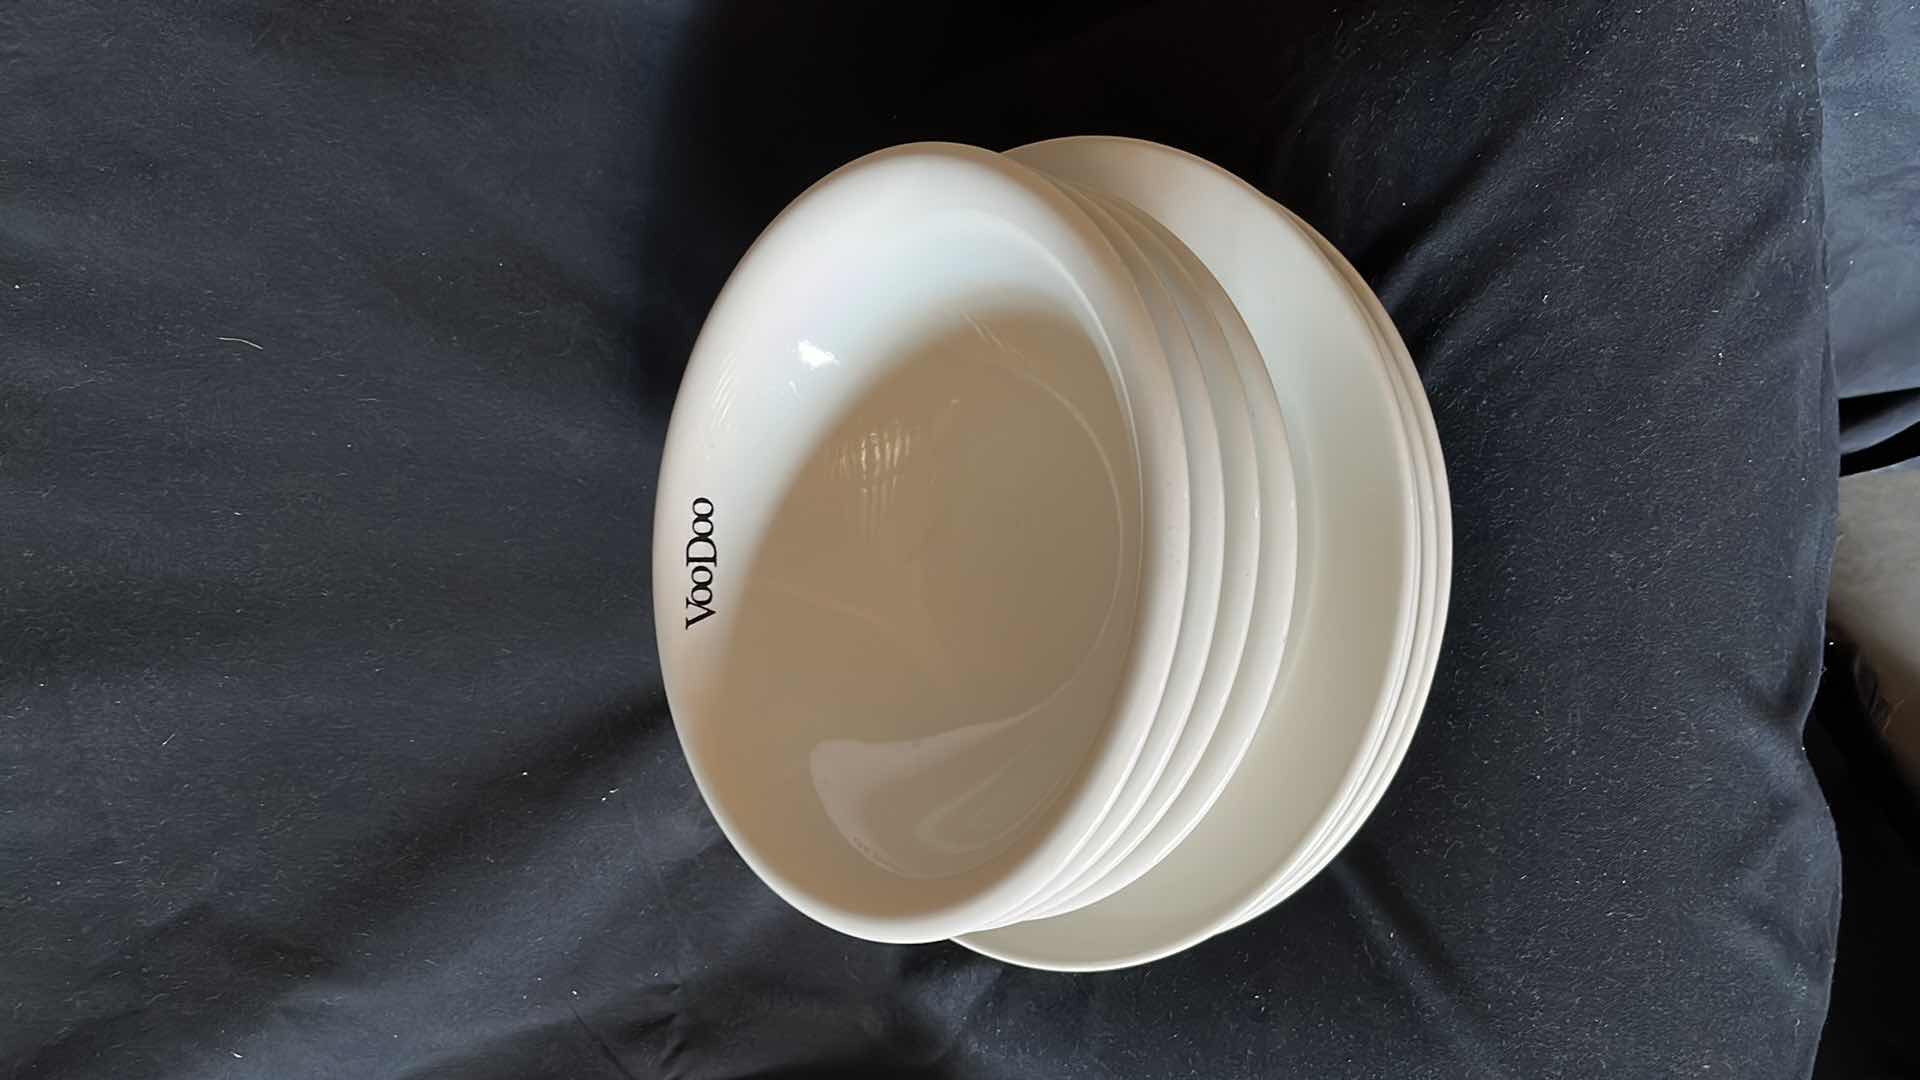 Photo 2 of DUDSON FINEST VOODOO SERVING BOWLS AND SERVING PLATES (SETS OF 4)